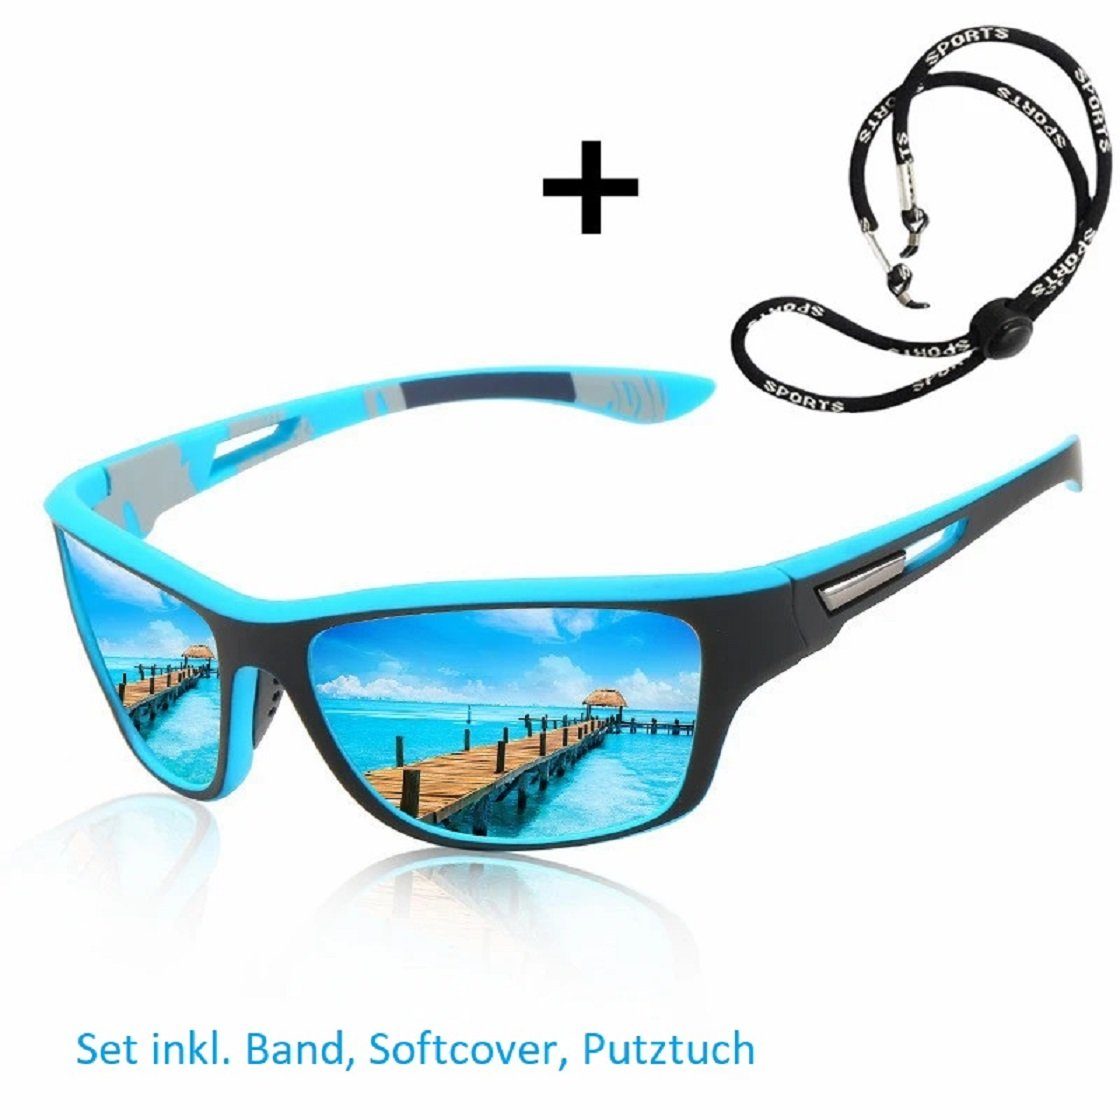 Amy too Softcover, Band, Sportbrille Tornado, Putztuch Brille